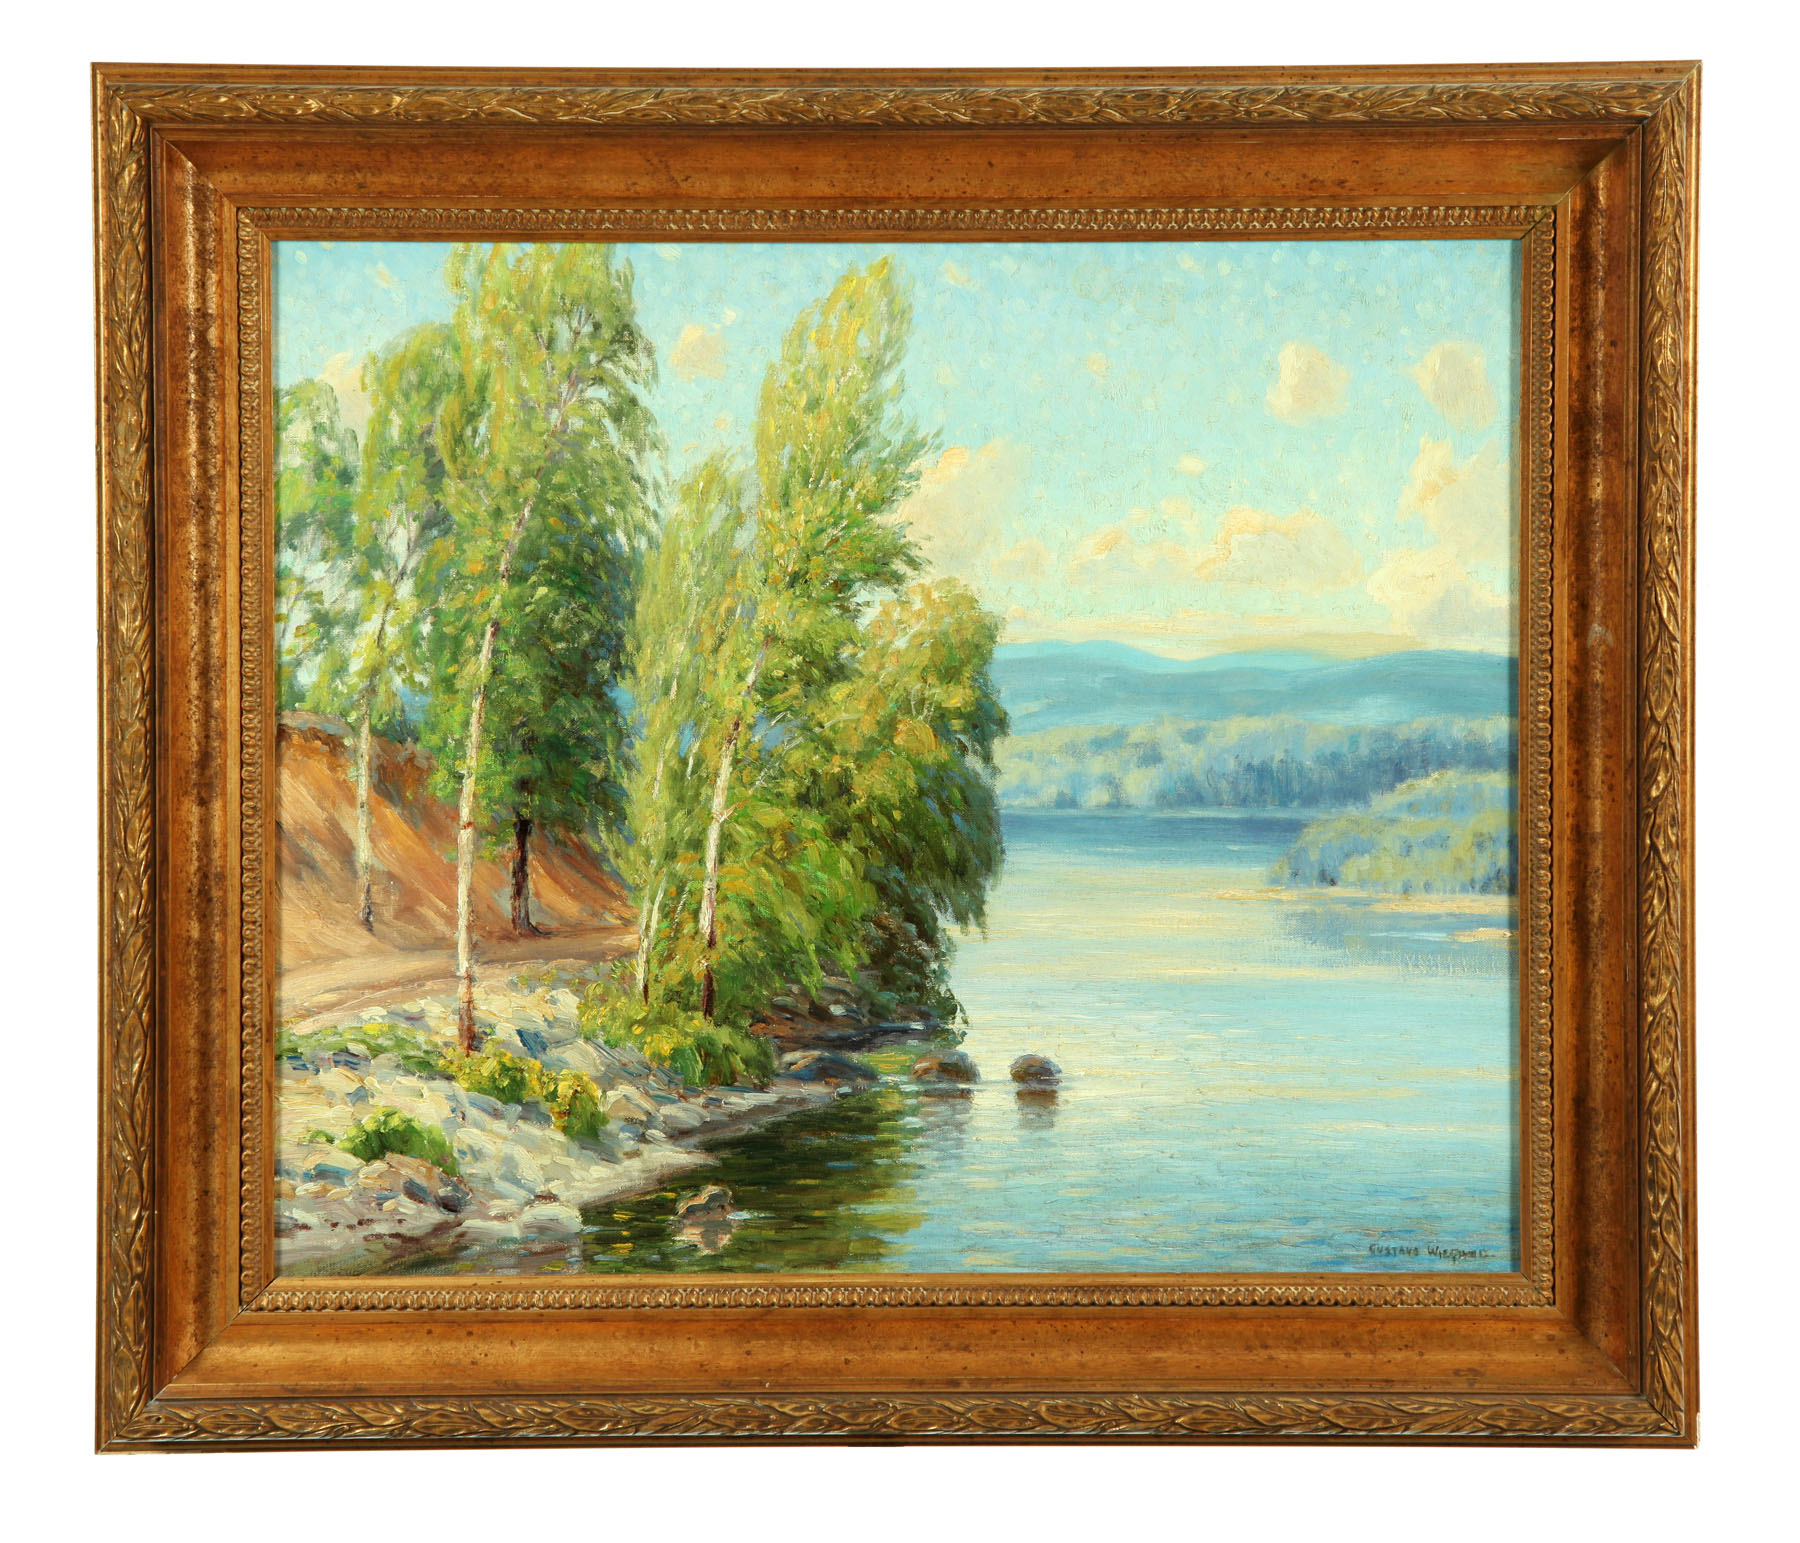 LAKE SUNAPEE  N.H. BY GUSTAVE ADOLPH